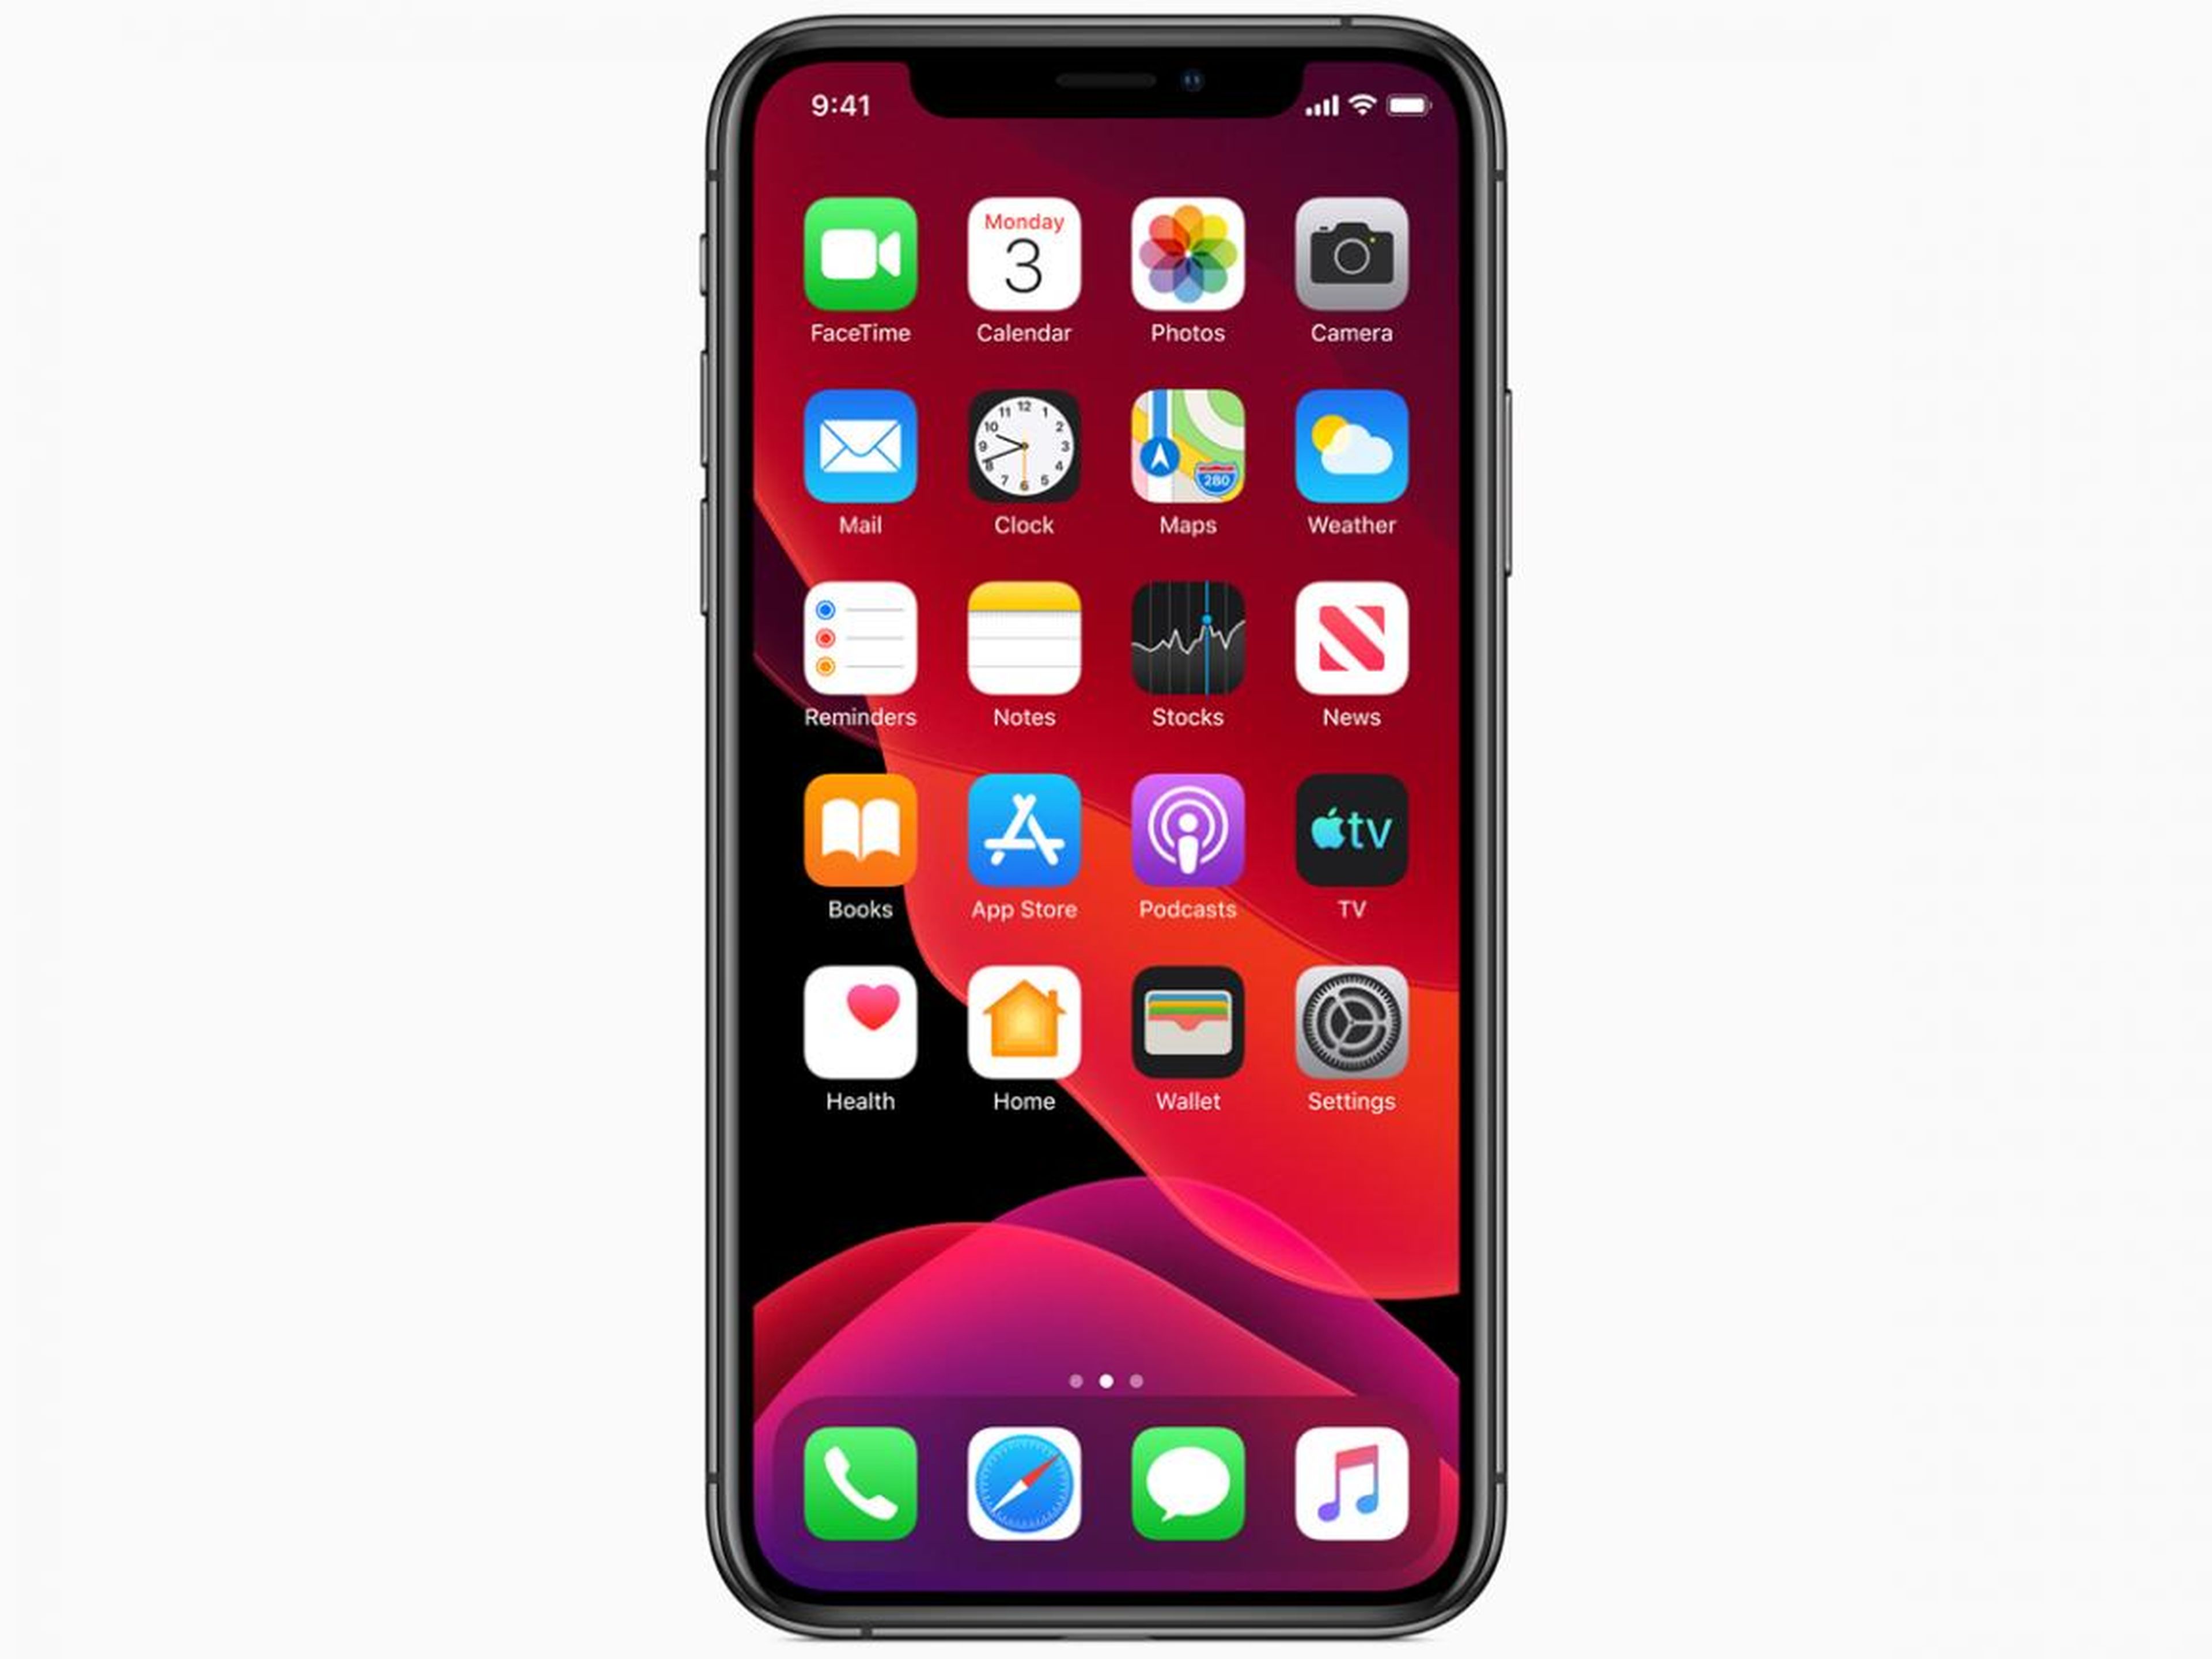 And here's what the iOS 13 home screen looks like with dark mode enabled.